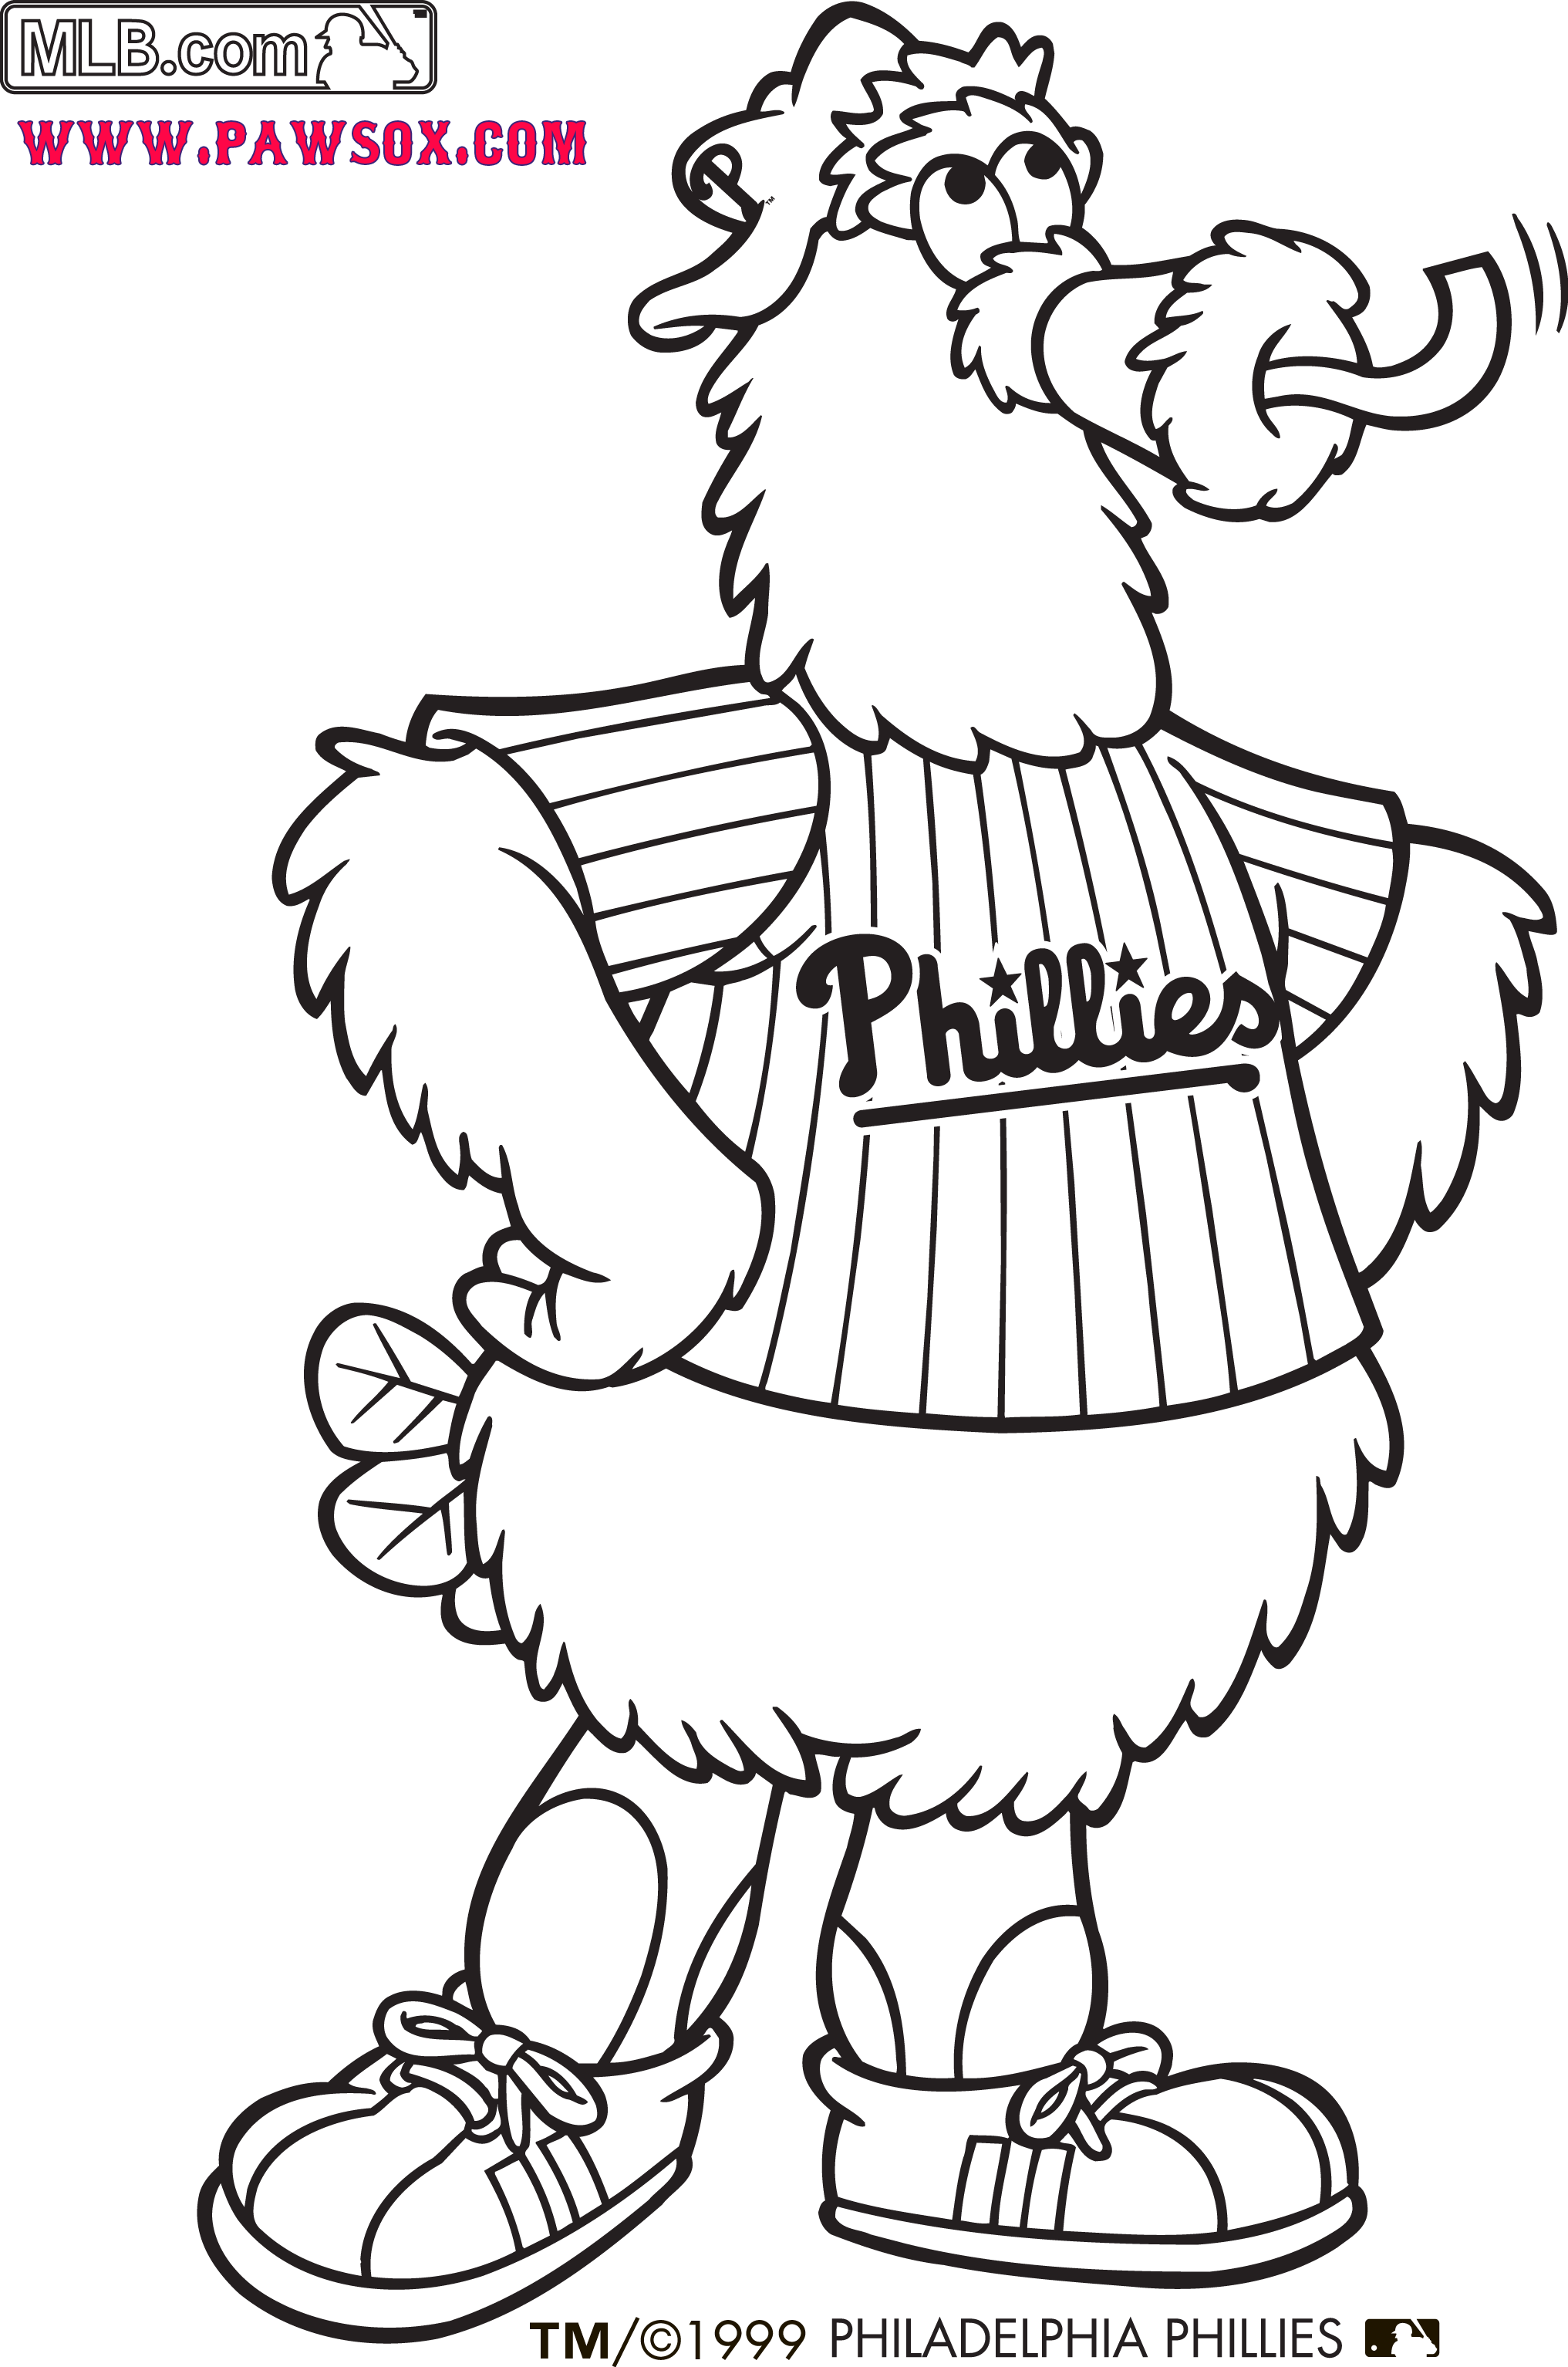 Phillies Phanatic Coloring Page - Coloring Home